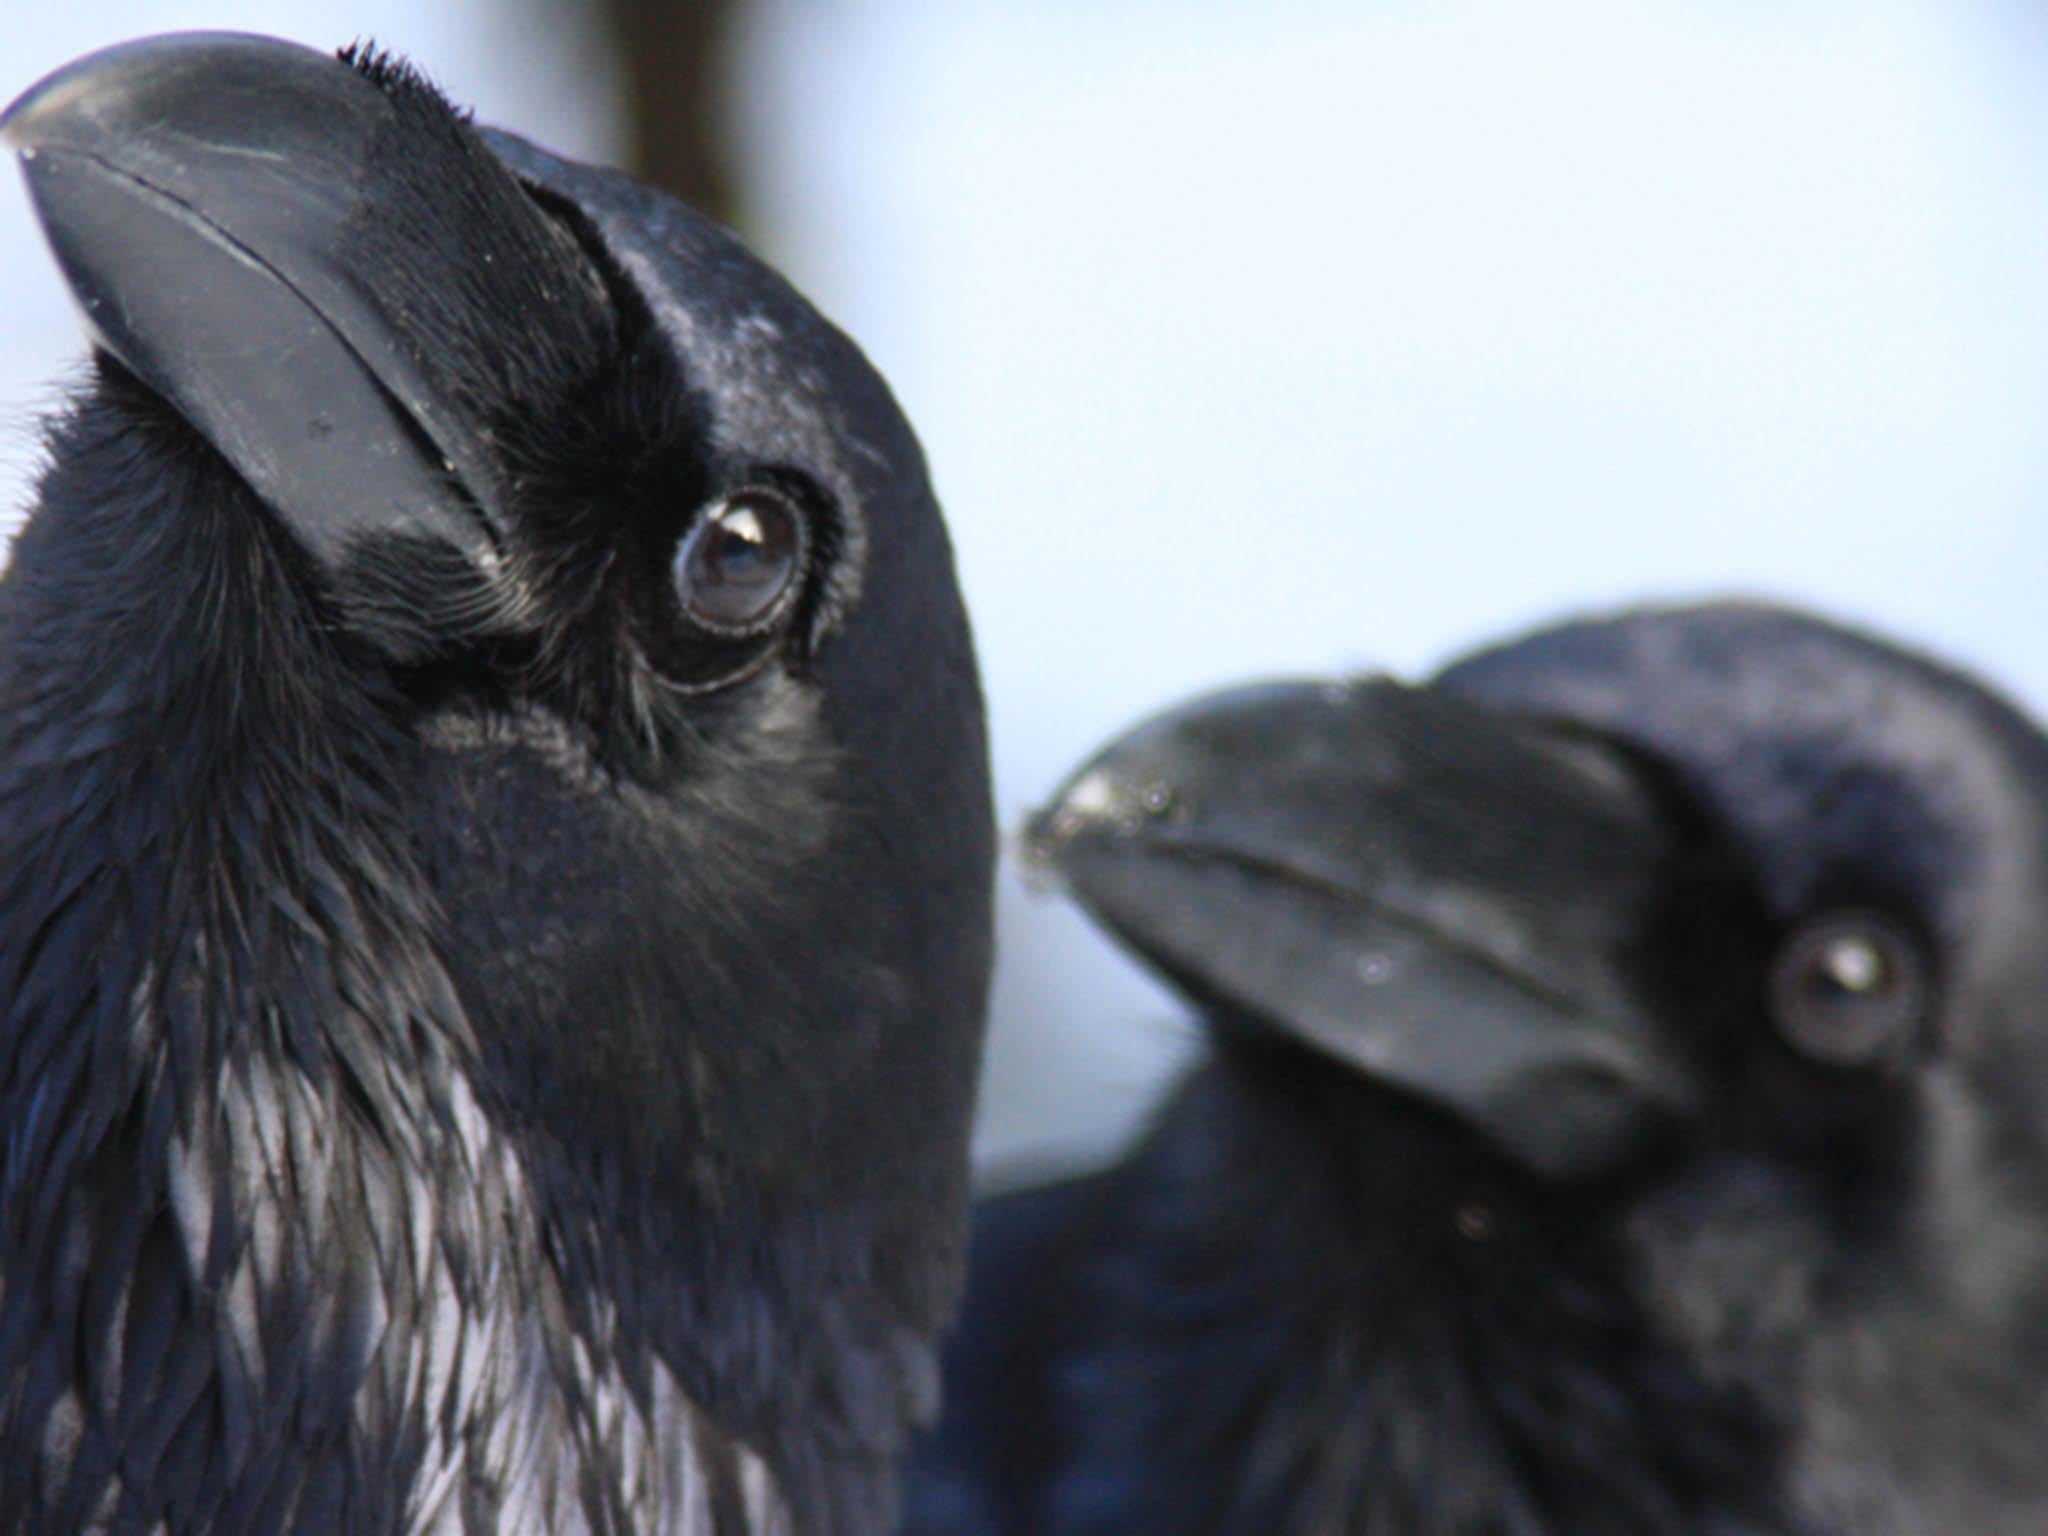 In one study, crows that realised they were being rewarded unfairly, compared to their peers, became uncooperative